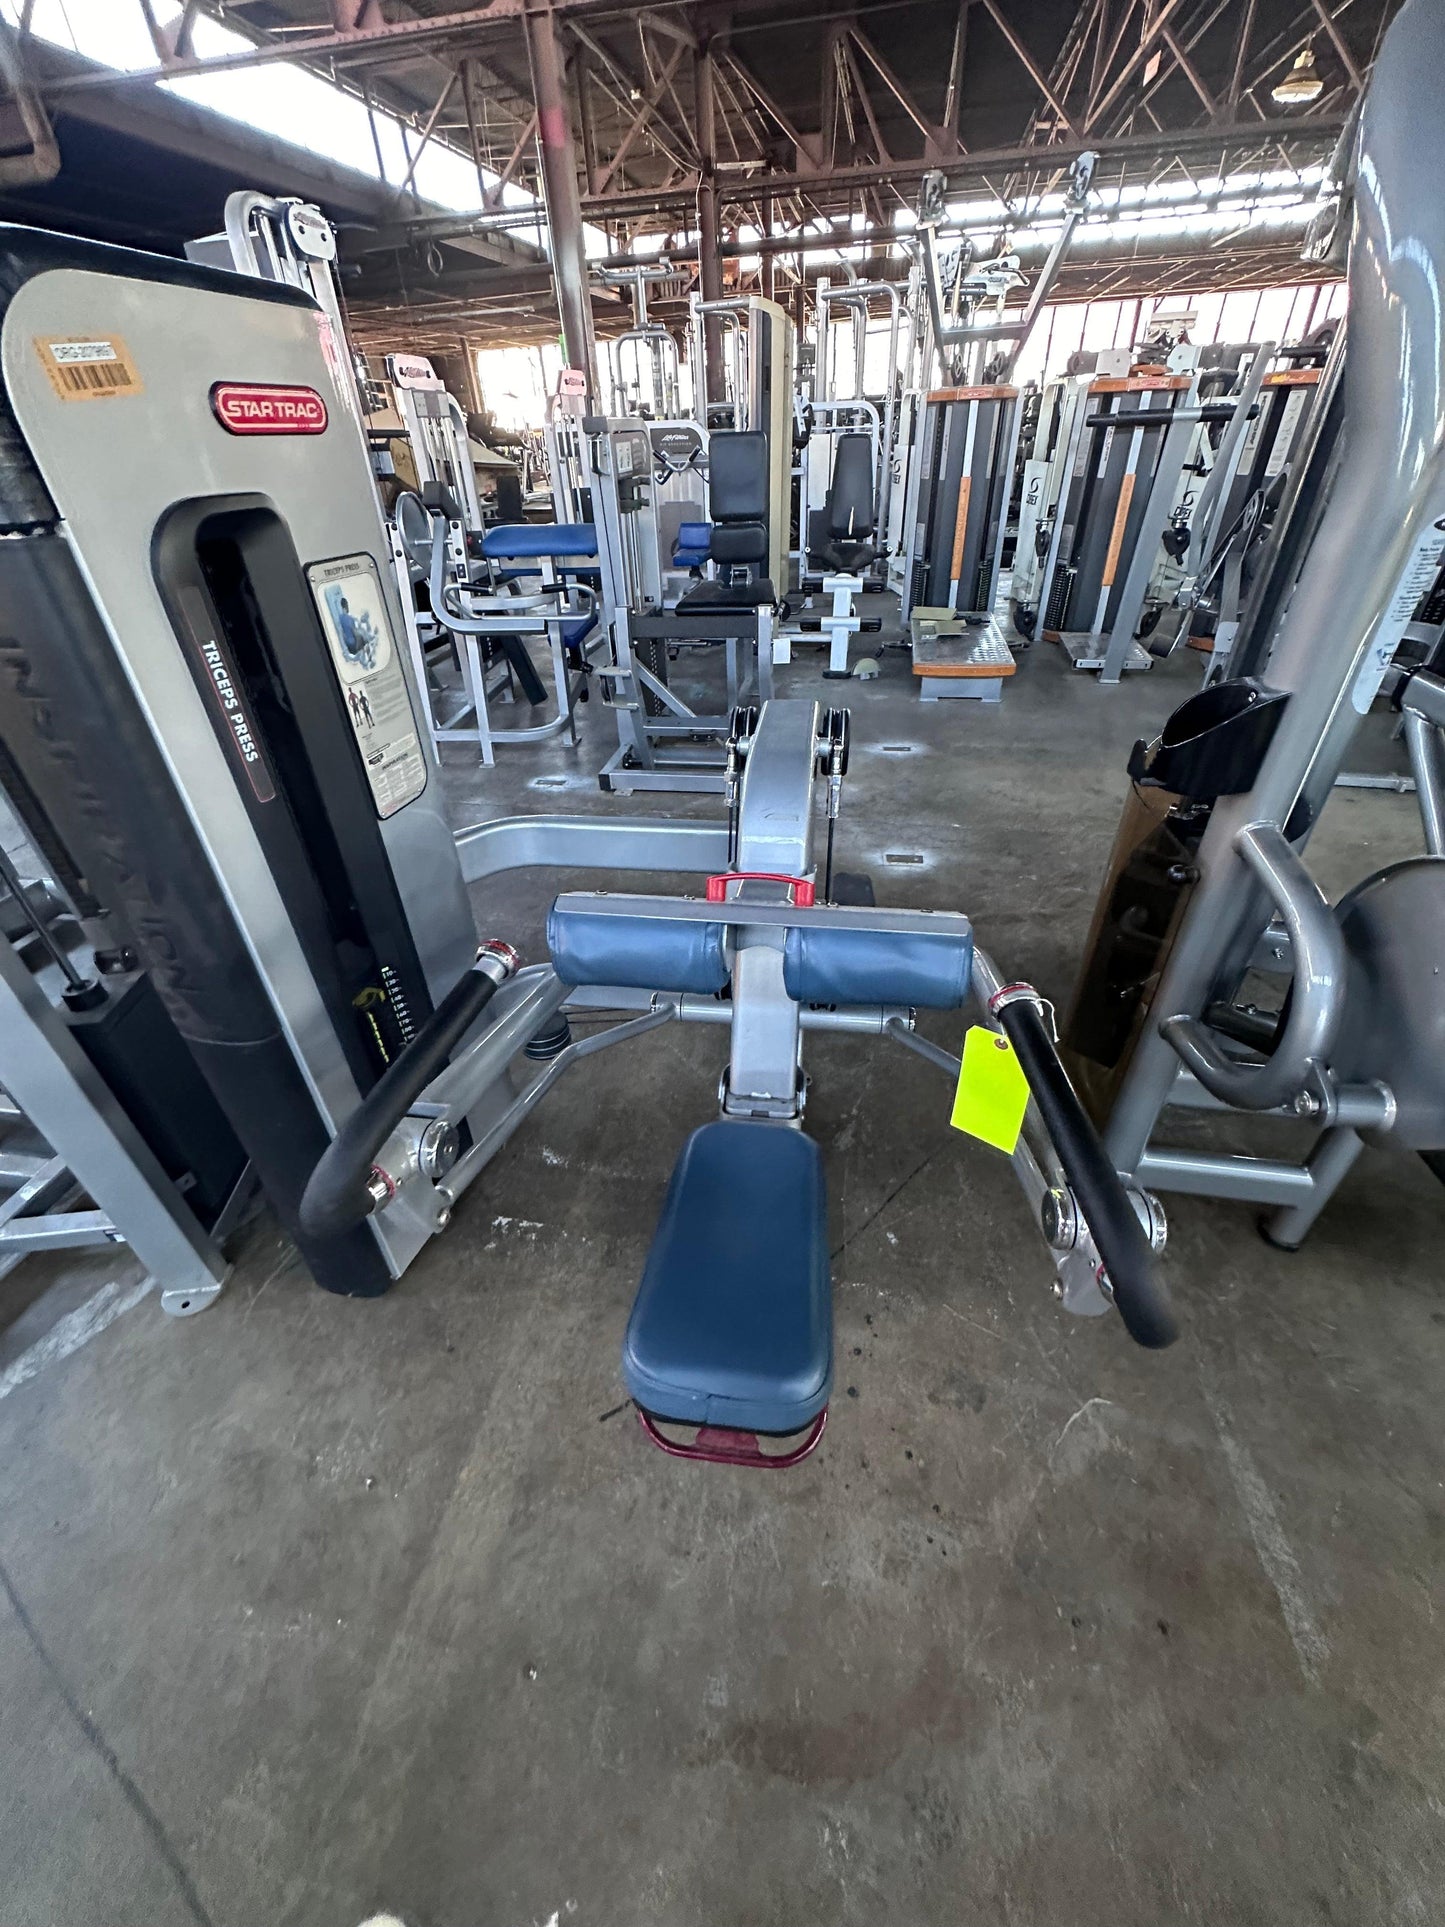 Pre-Owned Star Trac Inspiration Tricep Press - ExerciseUnlimited